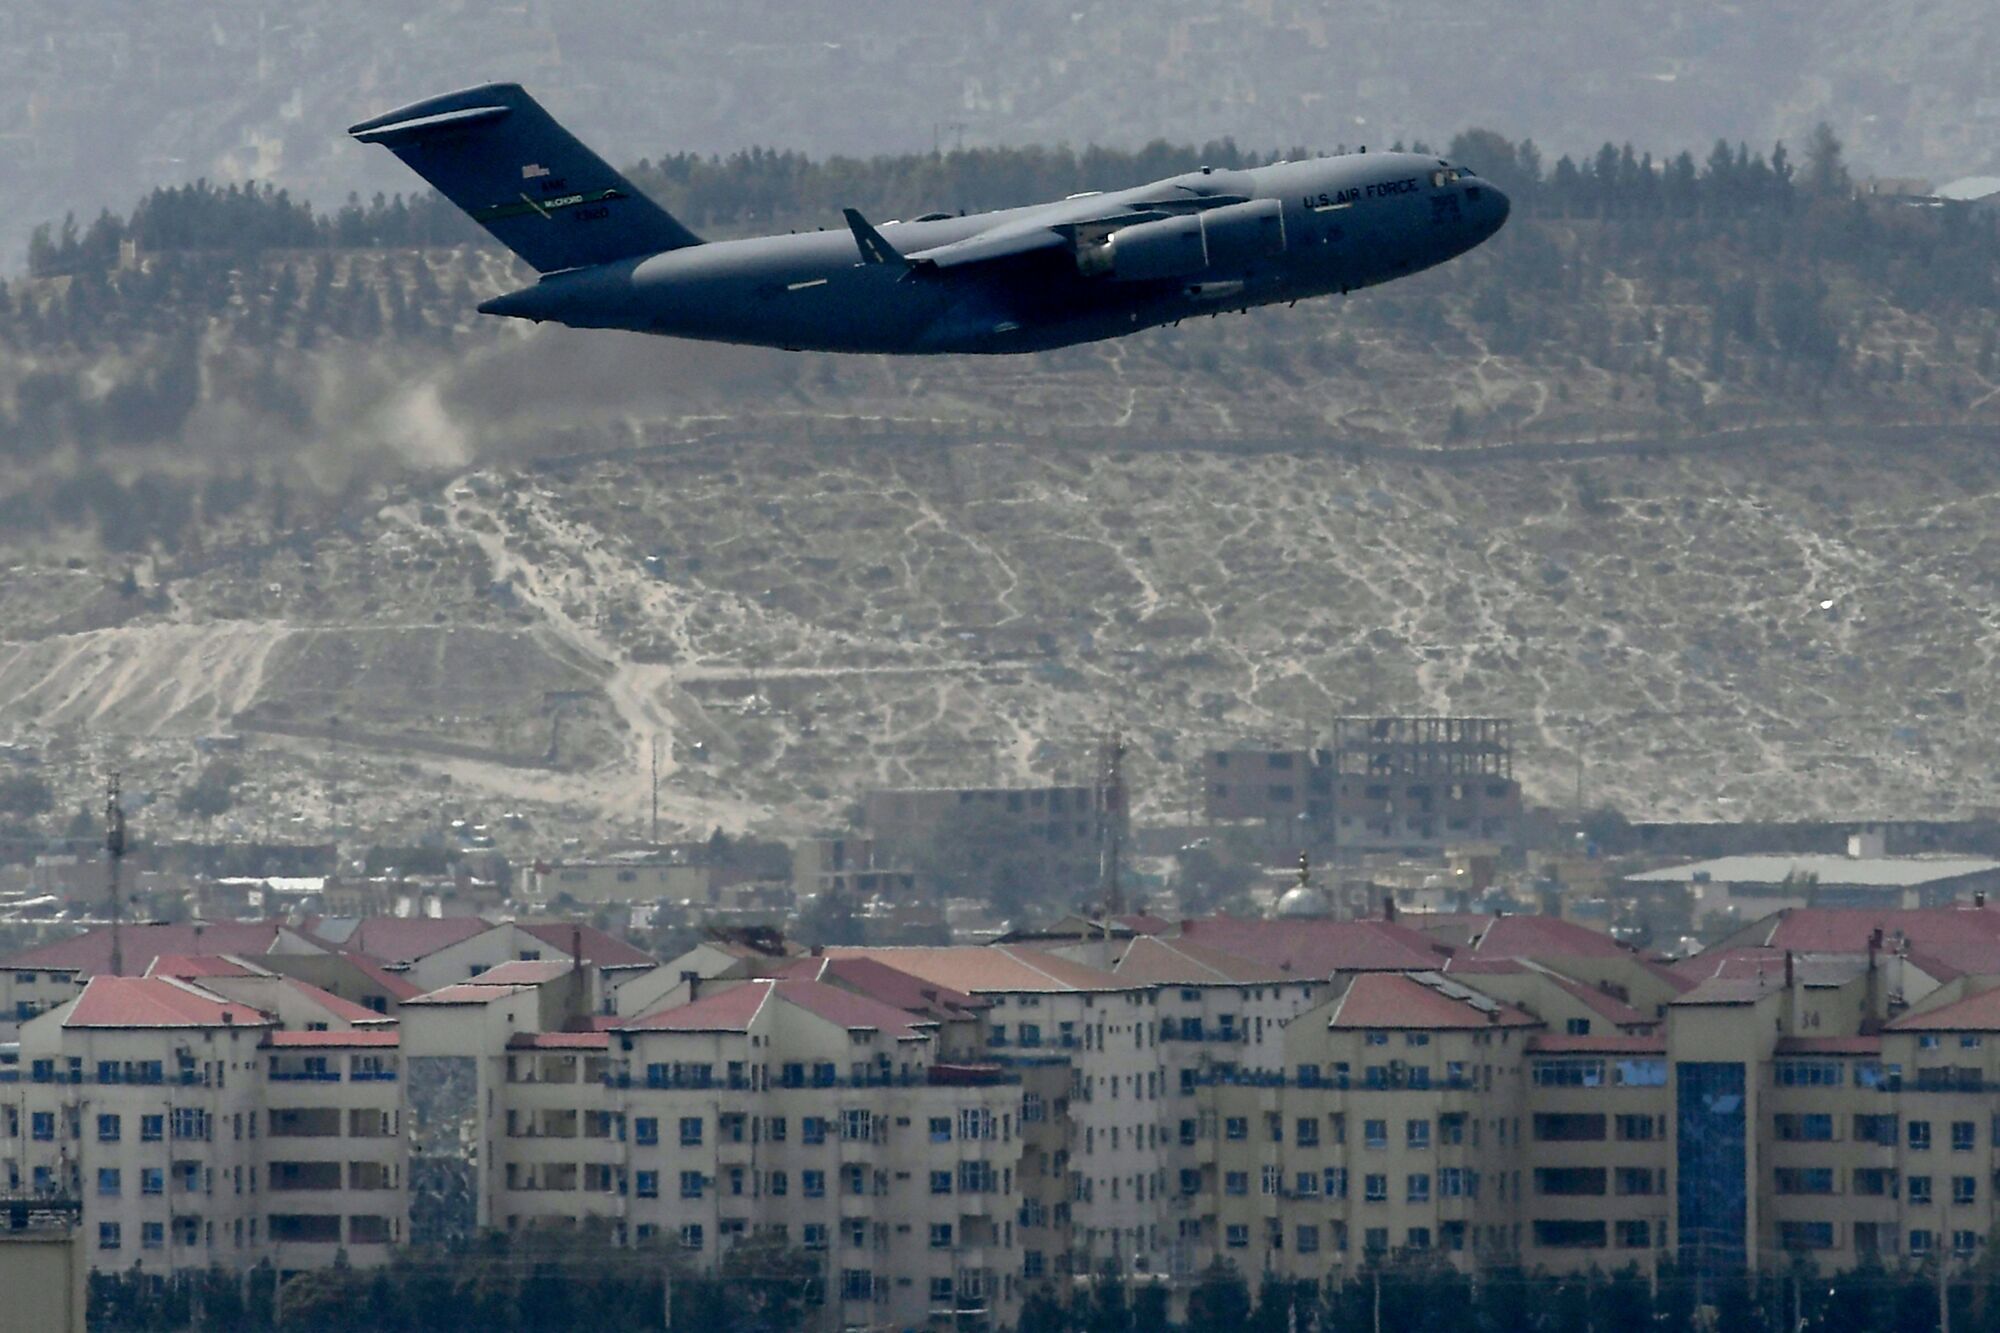 An US Air Force aircraft takes off from the airport in Kabul on August 30, 2021